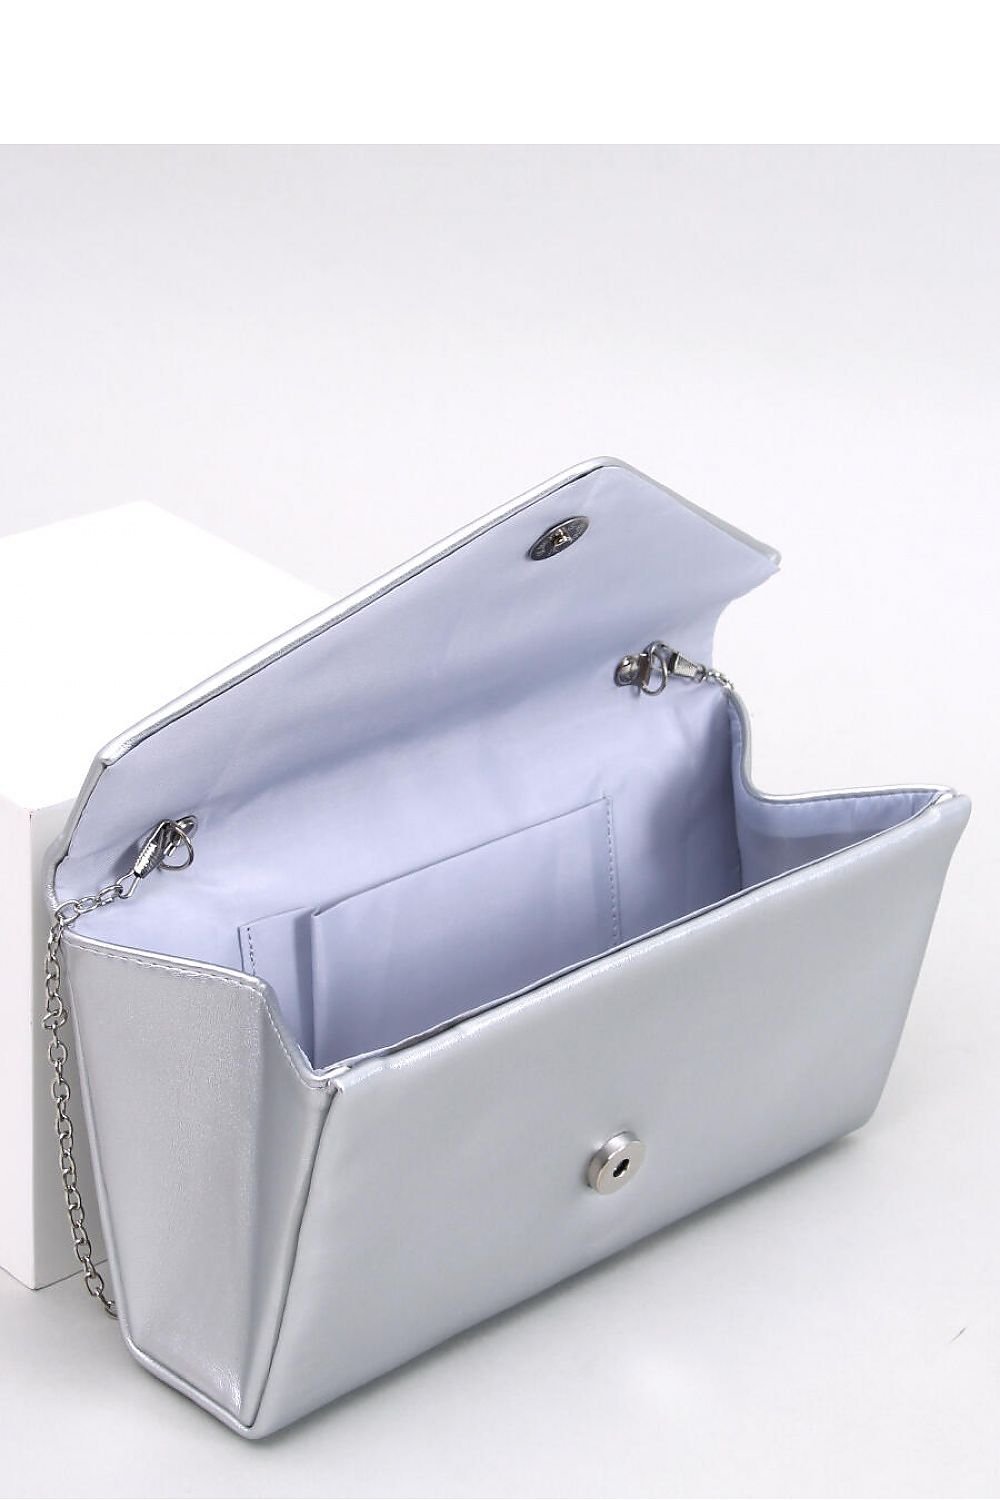 Envelope clutch bag - M&H FashionEnvelope clutch bagM&H FashionM&H Fashion192447_1116839one-size-fits-allEnvelope clutch bag InelloM&H FashionM&H FashionElegant handbag for women ? clutch bag. It can be carried in two ways ? in hand or on a silver chain attached to it. The unique beauty of the handbag lies in the claEnvelope clutch bag